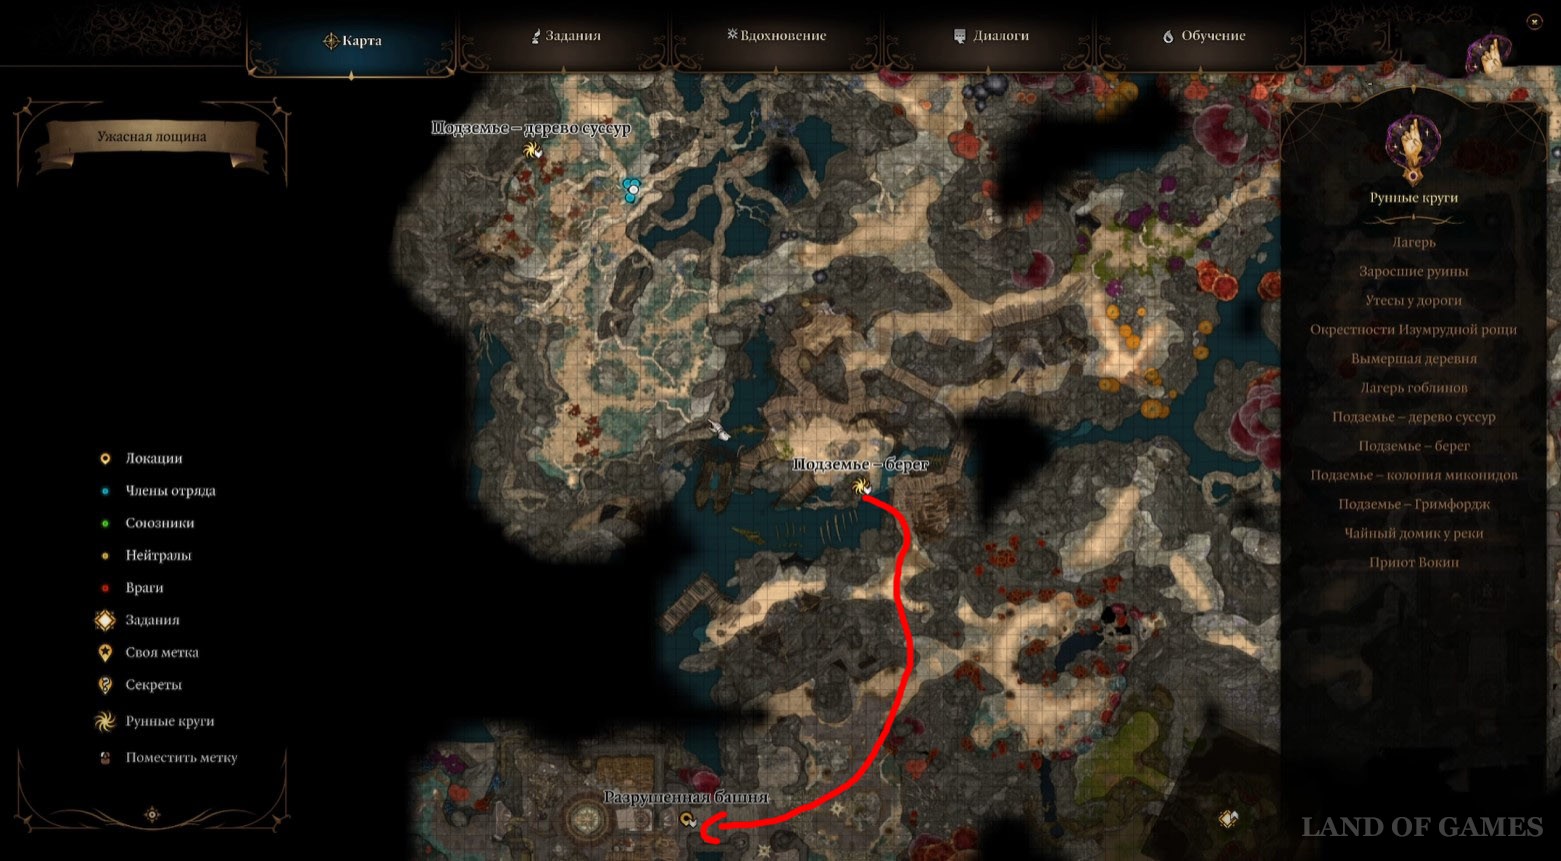 Arcane Odyssey: How To Get to the Whispering Caverns' Secret Area